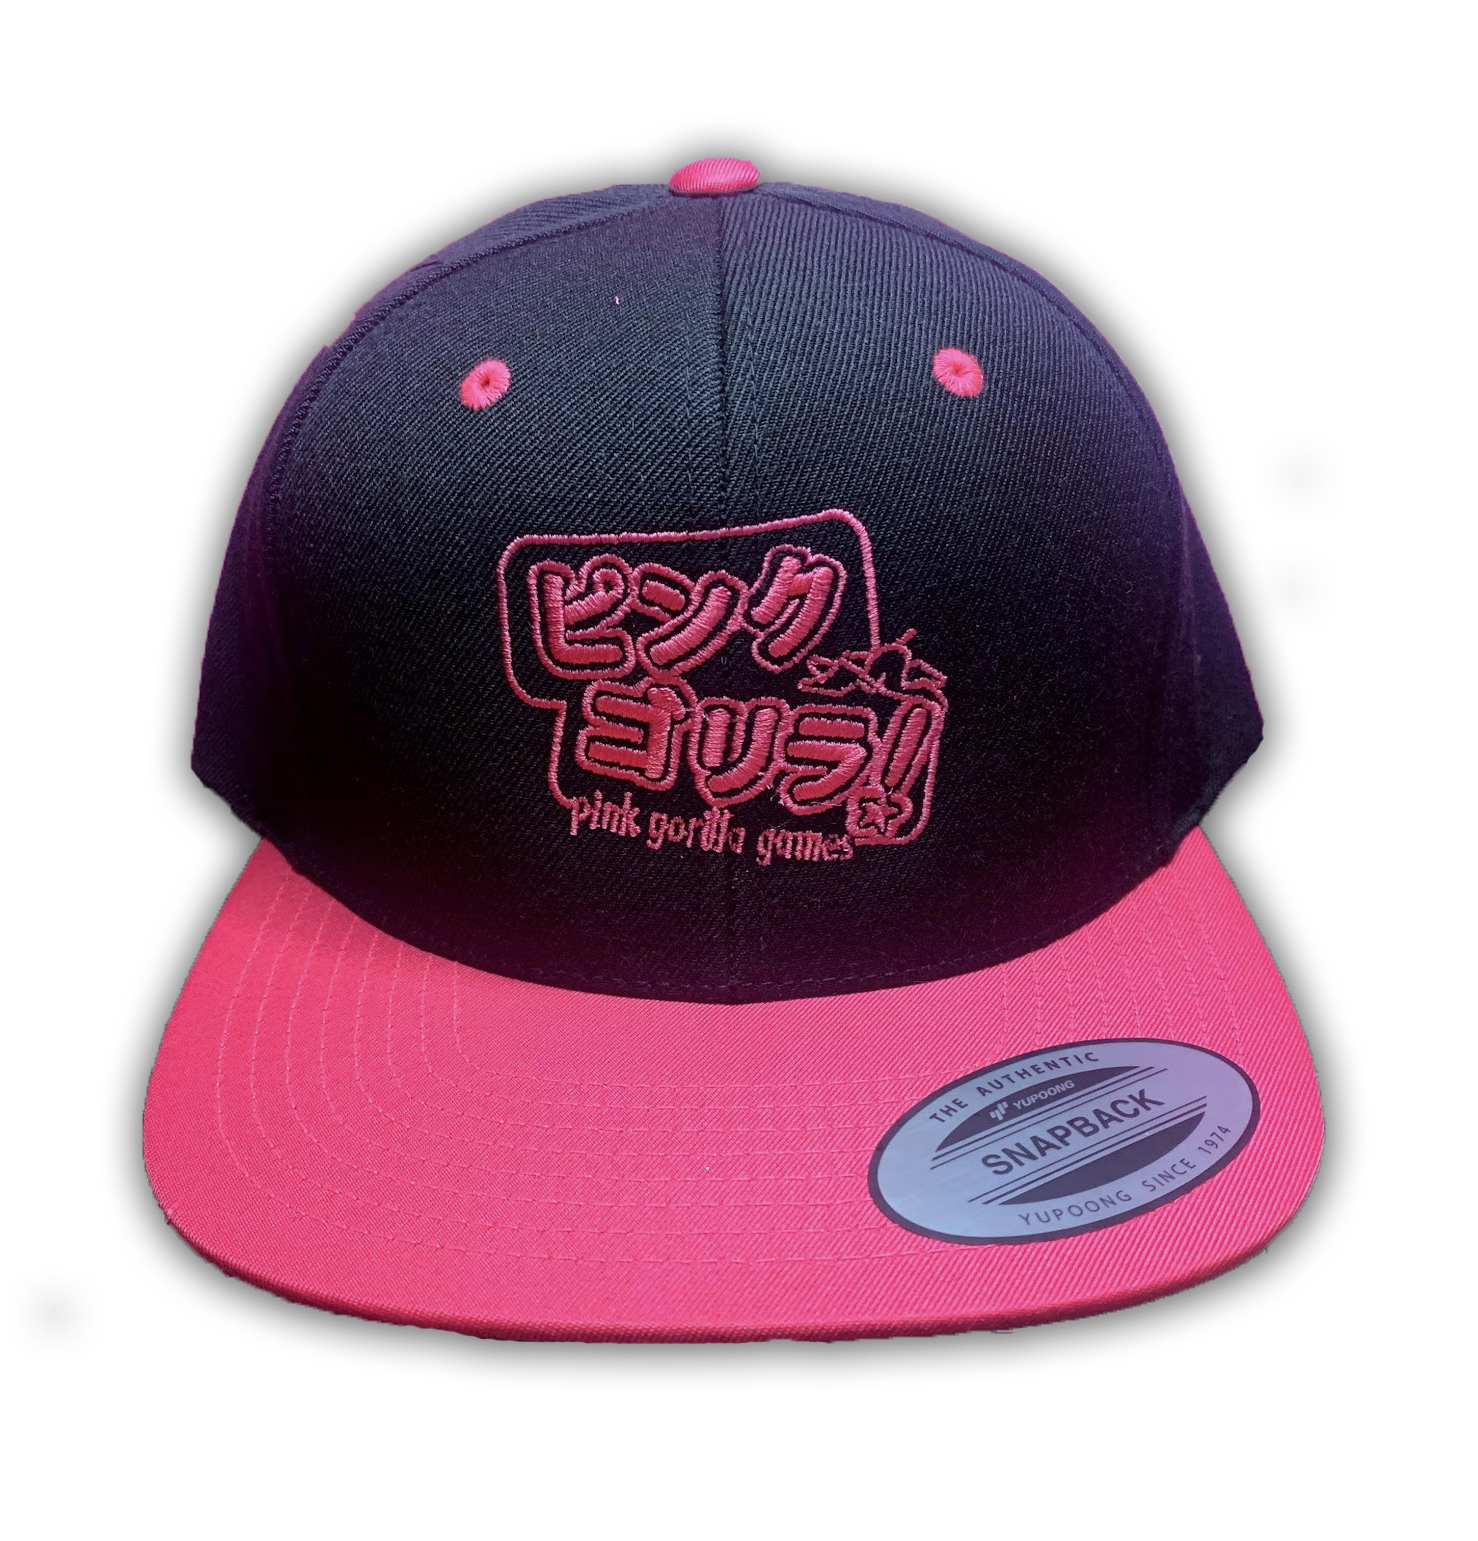 A front view of our snapback hat. The hat is black with a bright pink bill and accents. The embroidery is Japanese characters that read "Pink Gorilla", with english text that says "Pink Gorilla Games" underneath, in bright pink thread.